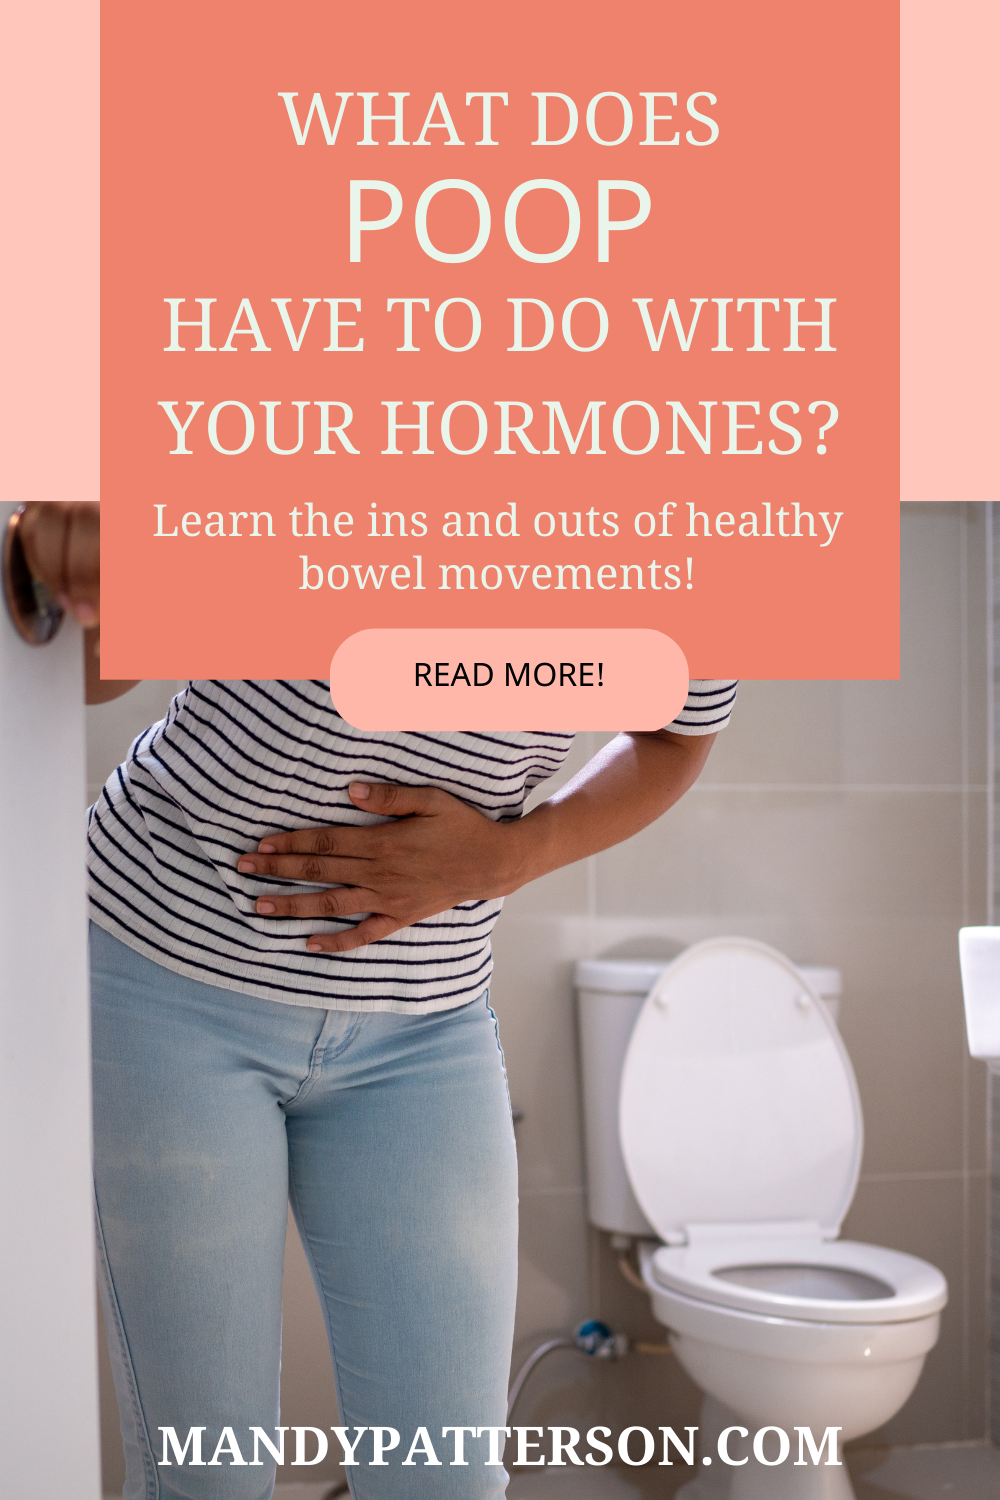 What Does Poop Have To Do With Your Hormones?